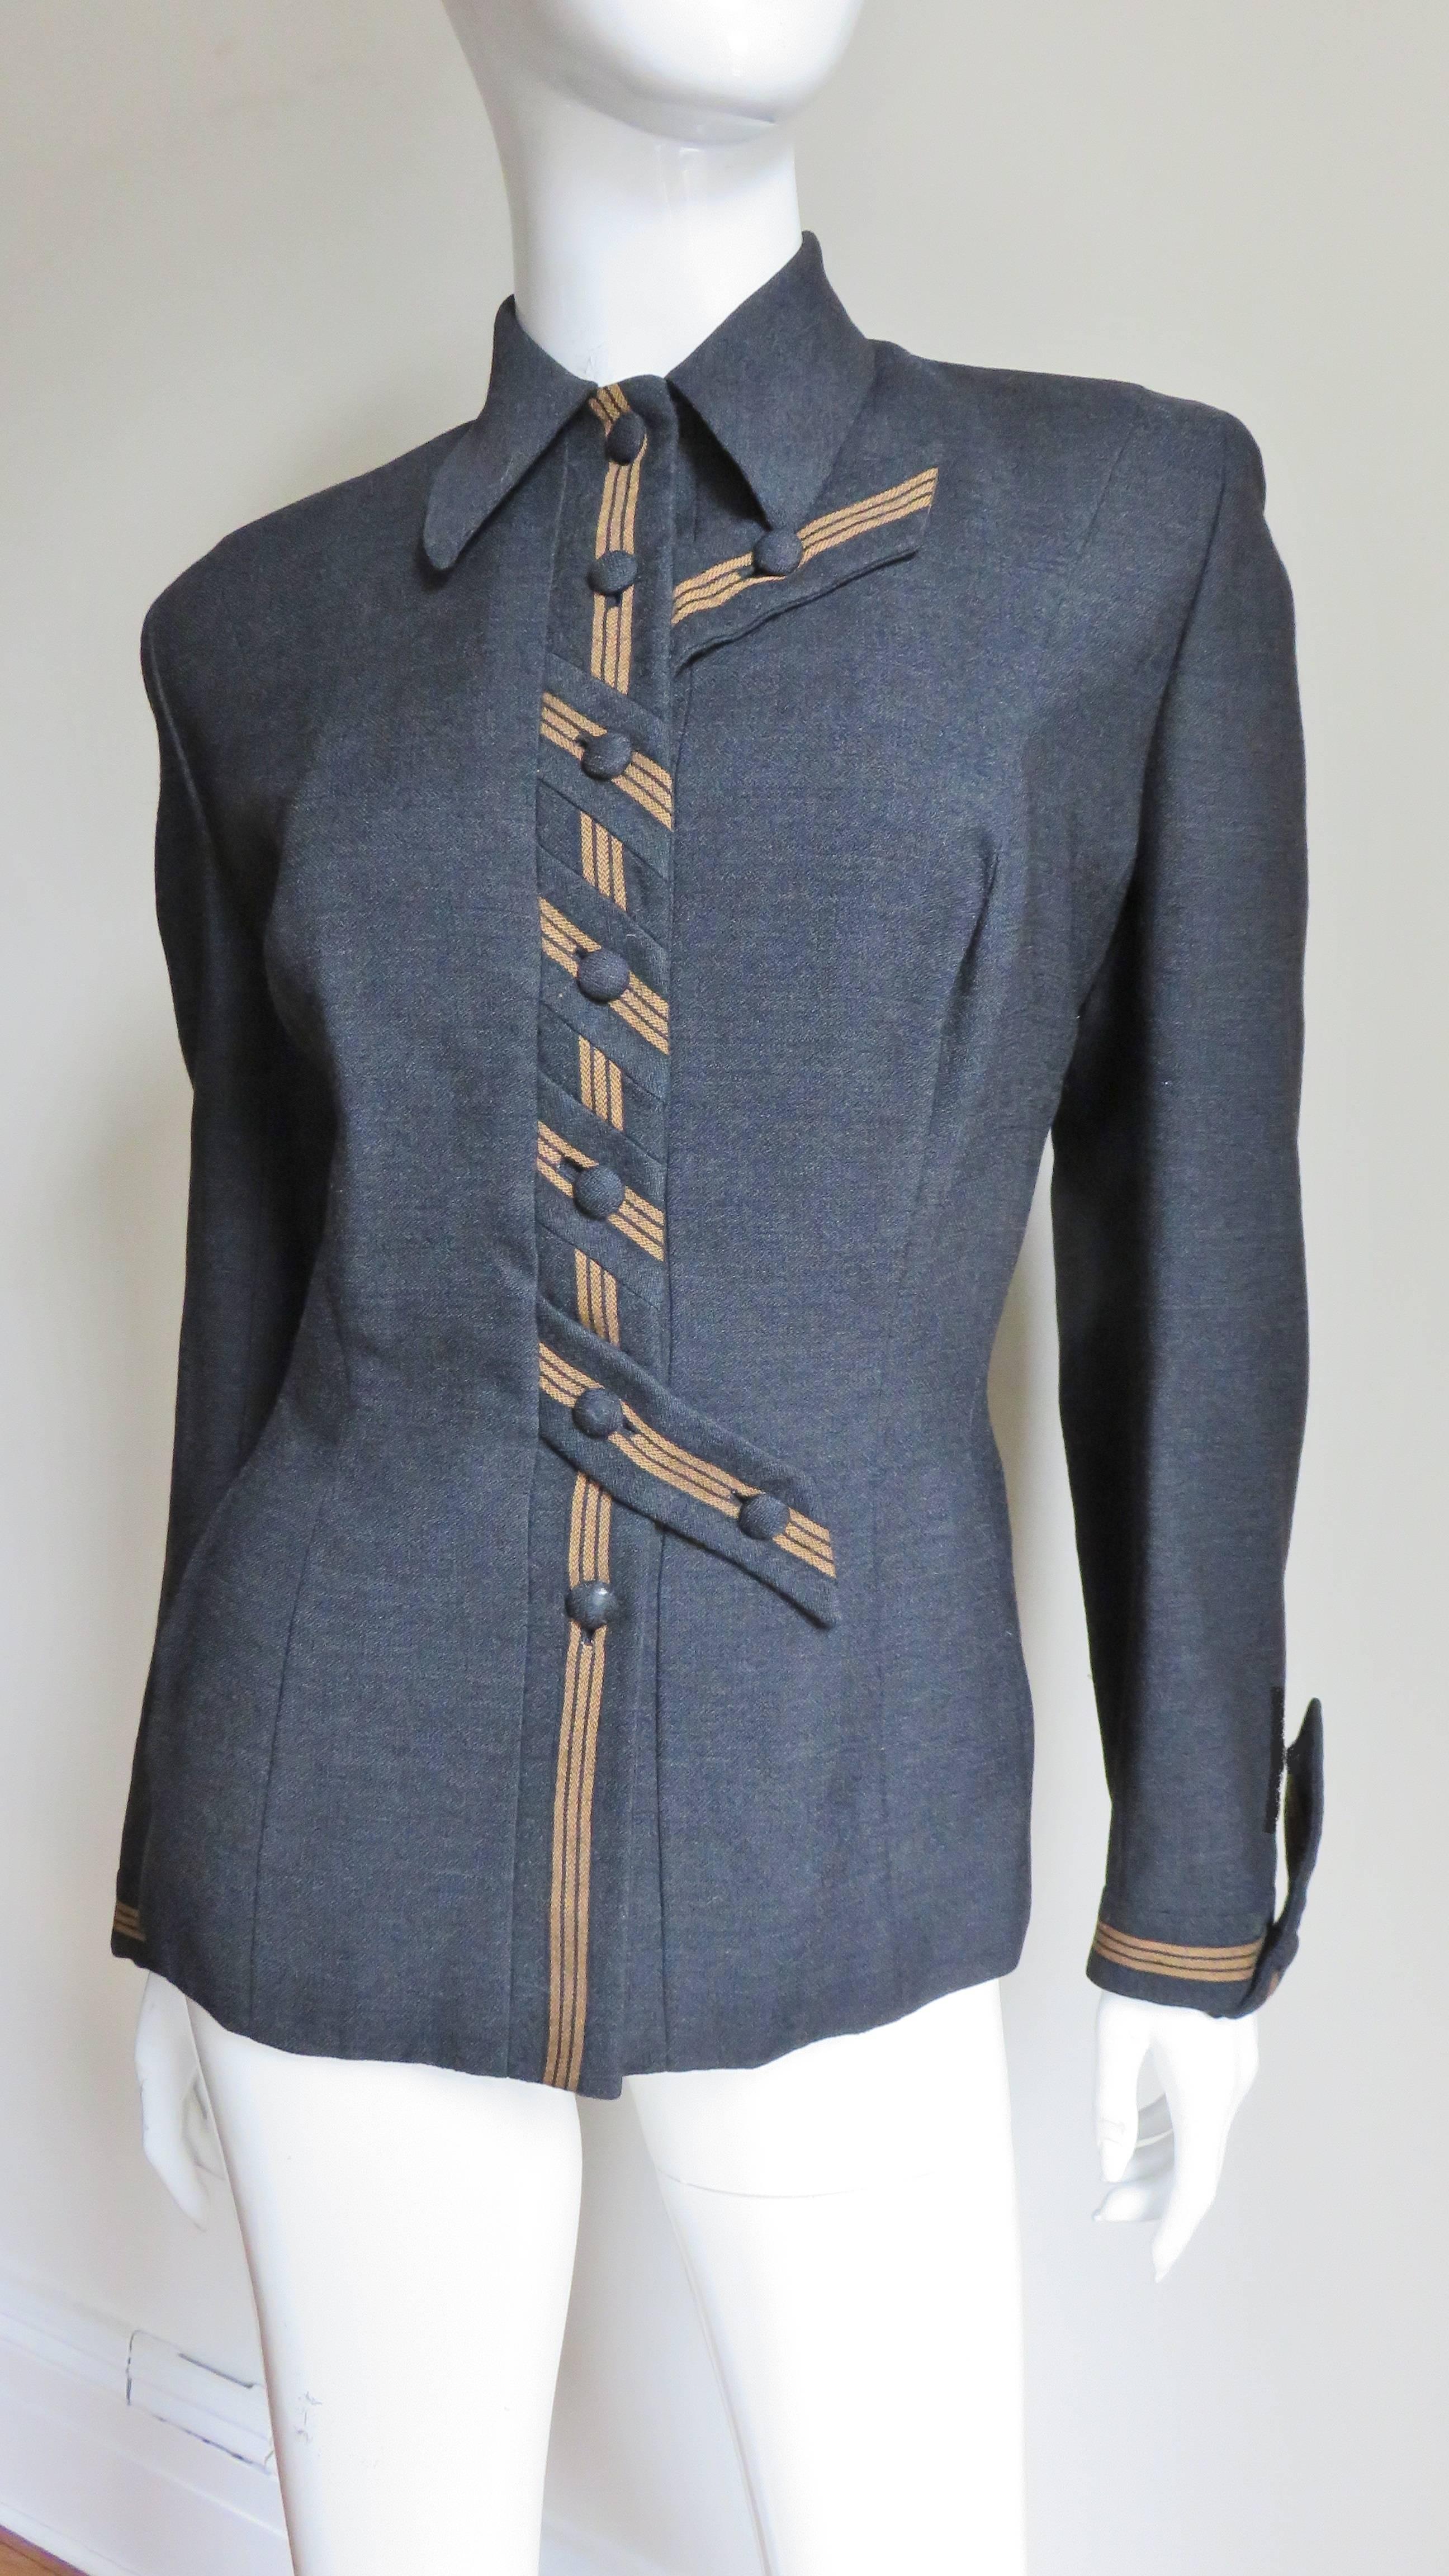 A stunning 1940's charcoal grey fine wool jacket by Sally Milgrim.  It has a shirt collar, princess seaming and shoulder padding.  The front closes with self covered buttons on a placket with tan striping.  The center 3 buttons are placed on angled